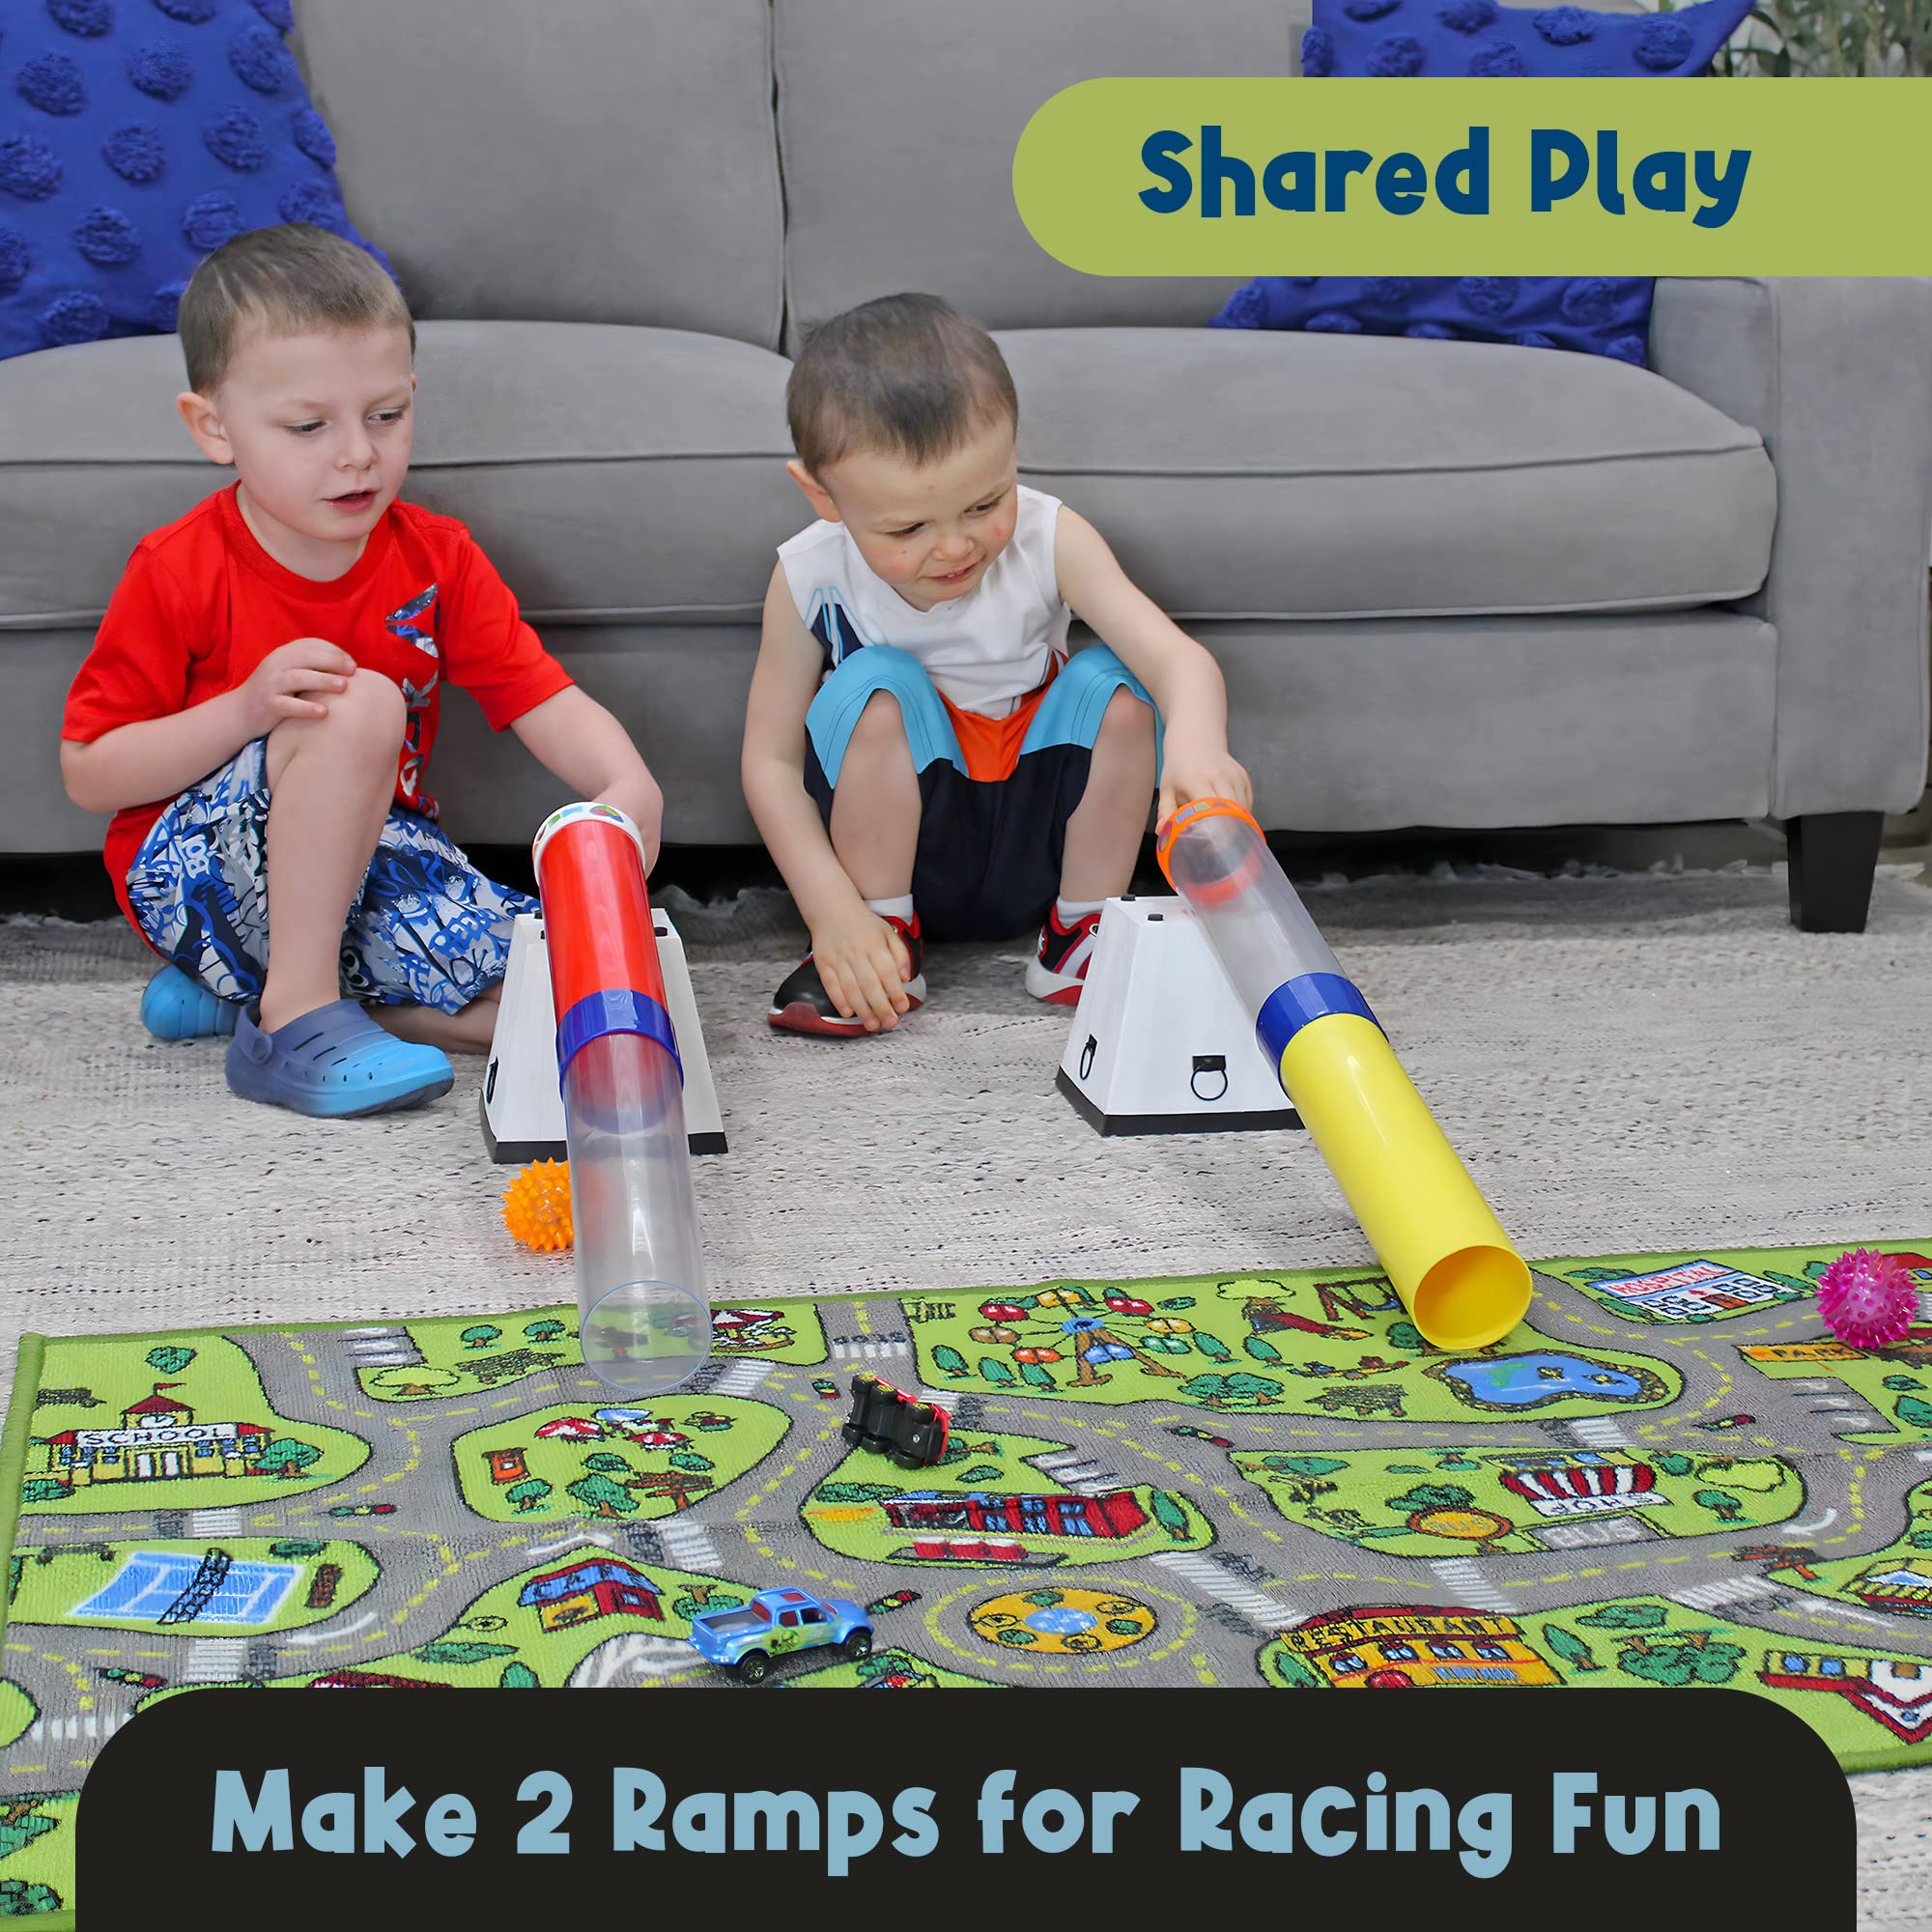 MEAVIA Toy Tunnel Ball Drop Race Track Set (7-Piece Set); Toy Car/Ball Ramp Play Set STEM Toy